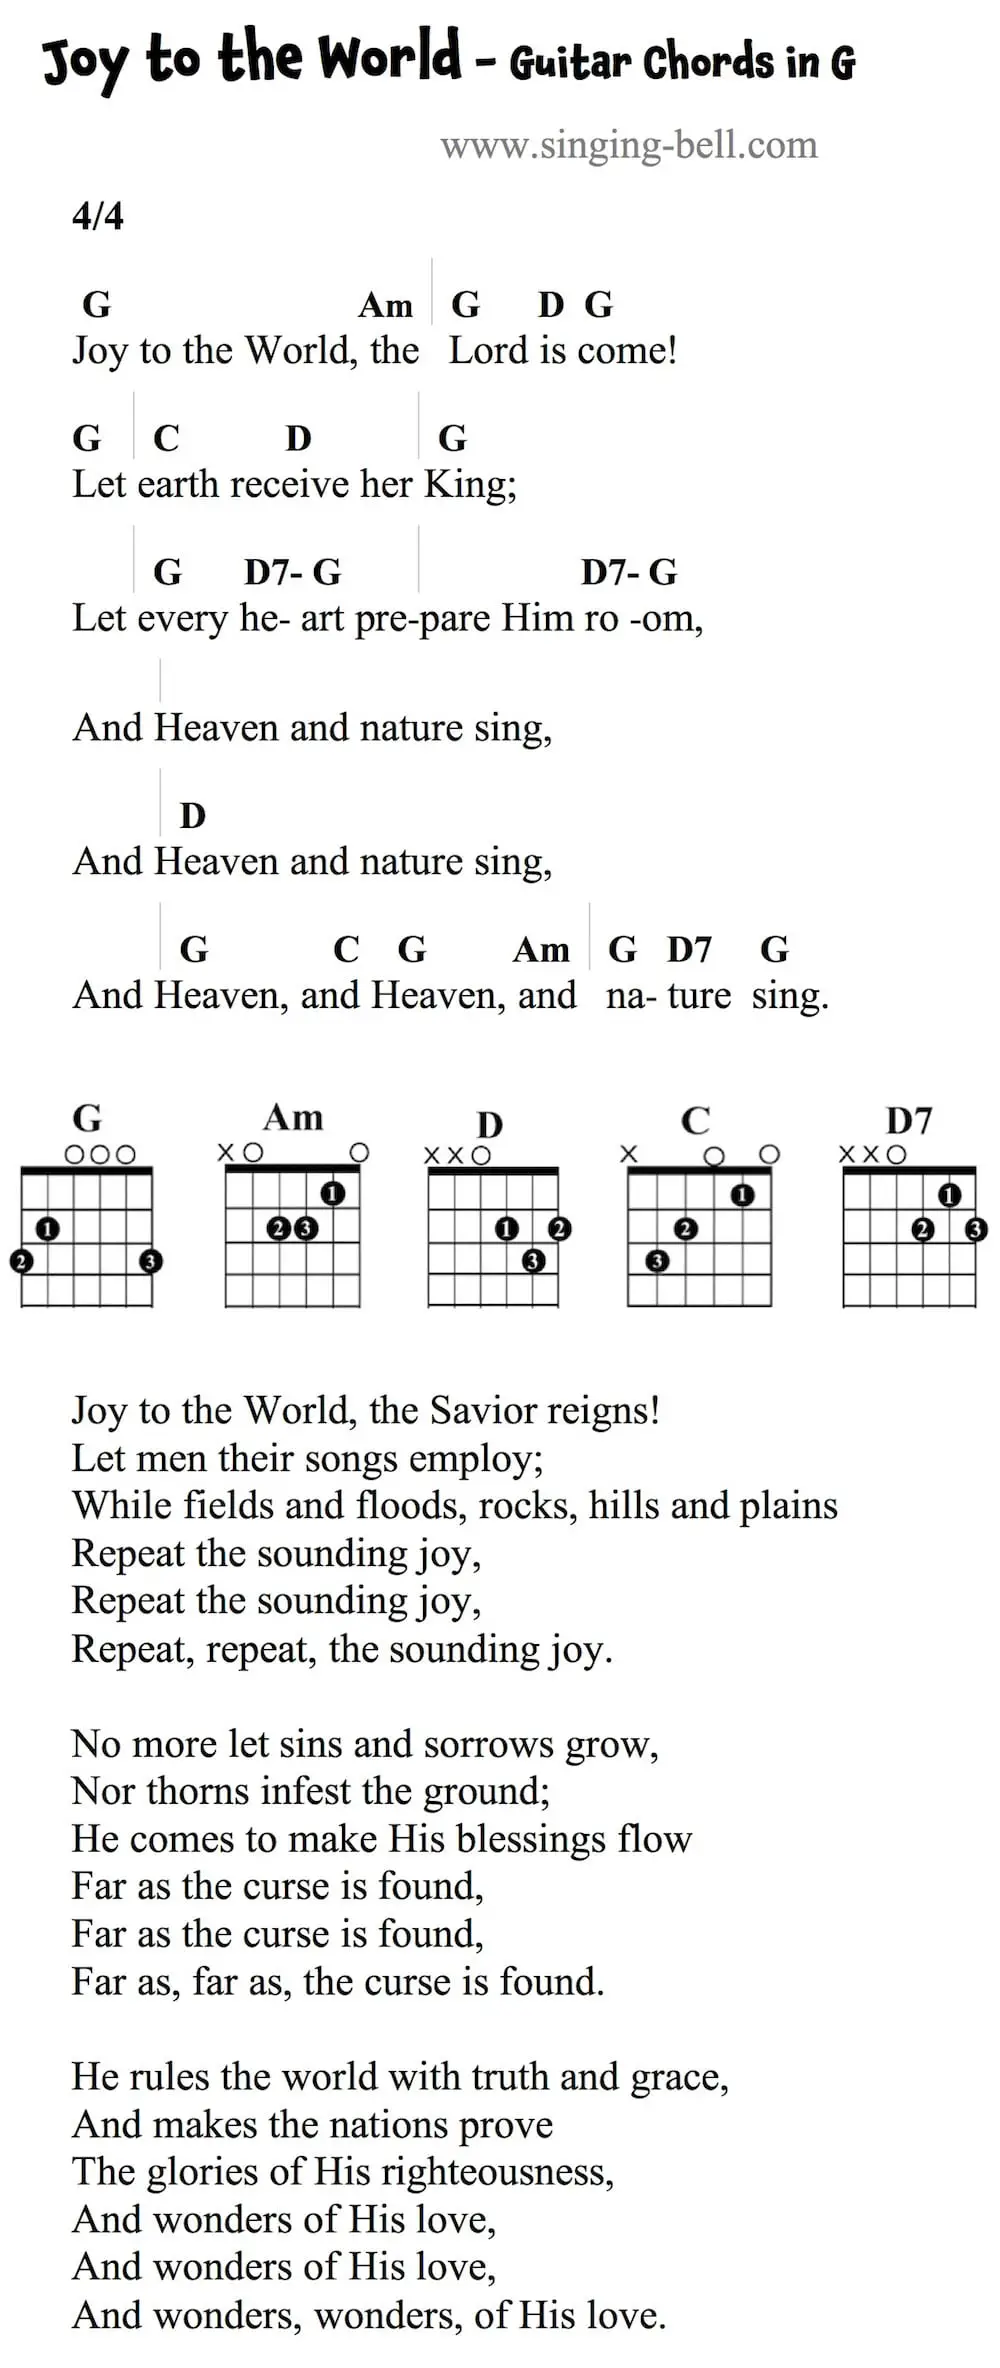 Joy to the World easy Guitar Chords and Tabs in G.